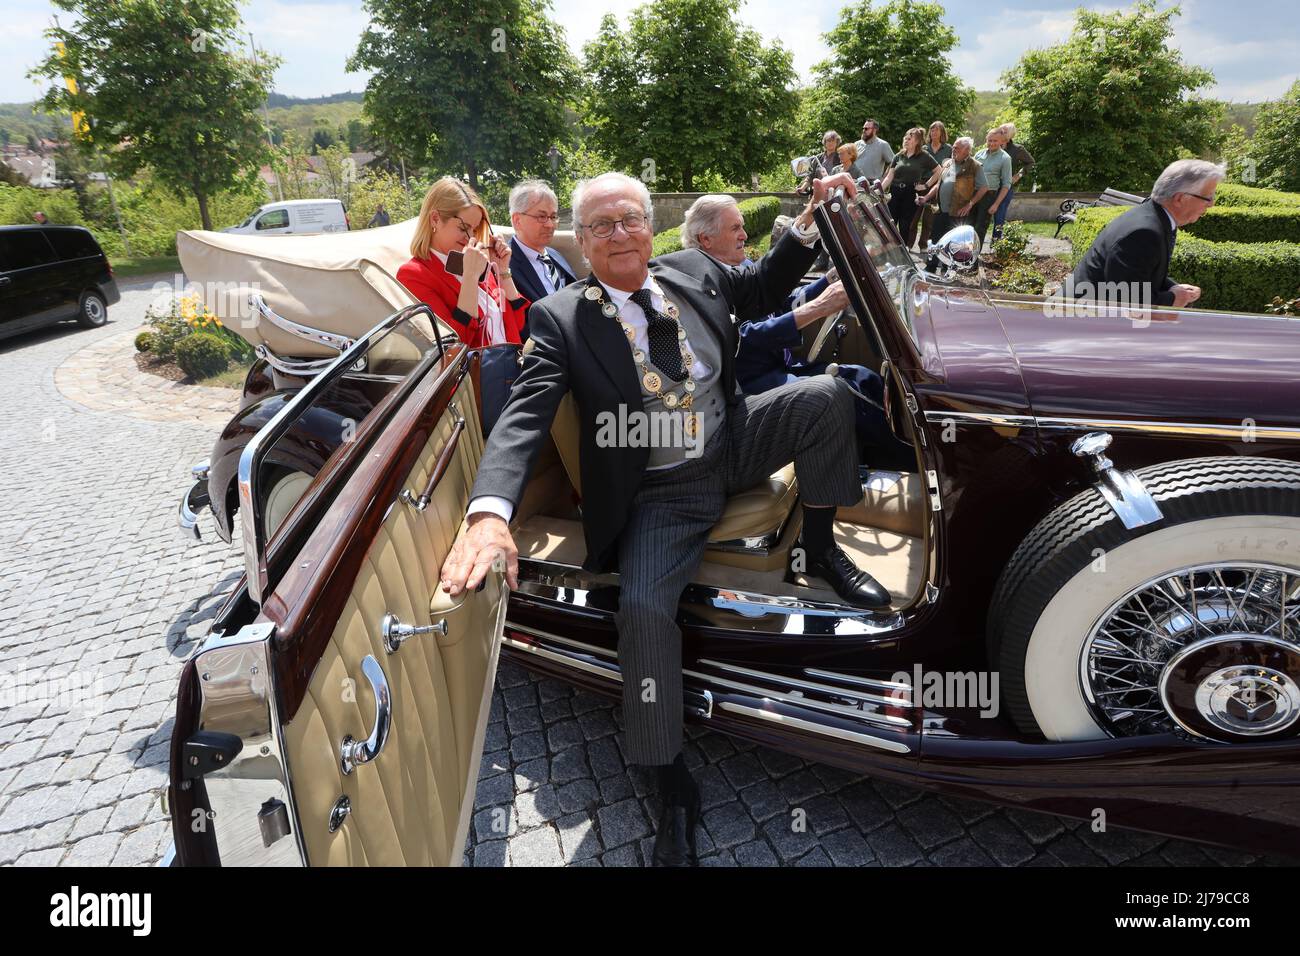 07 May 2022, Saxony-Anhalt, Ballenstedt: Eduard Prince von Anhalt drives up in a vehicle. He celebrates his 80th birthday in Ballenstedt. At the same time the investiture took place. In the context of the Investitur annually persons for special achievements of the Askanischen house order 'Albrecht the bear' are honored. The investiture takes place in the presence of Eduard Prince of Anhalt. Photo: Matthias Bein/dpa-Zentralbild/ZB Stock Photo